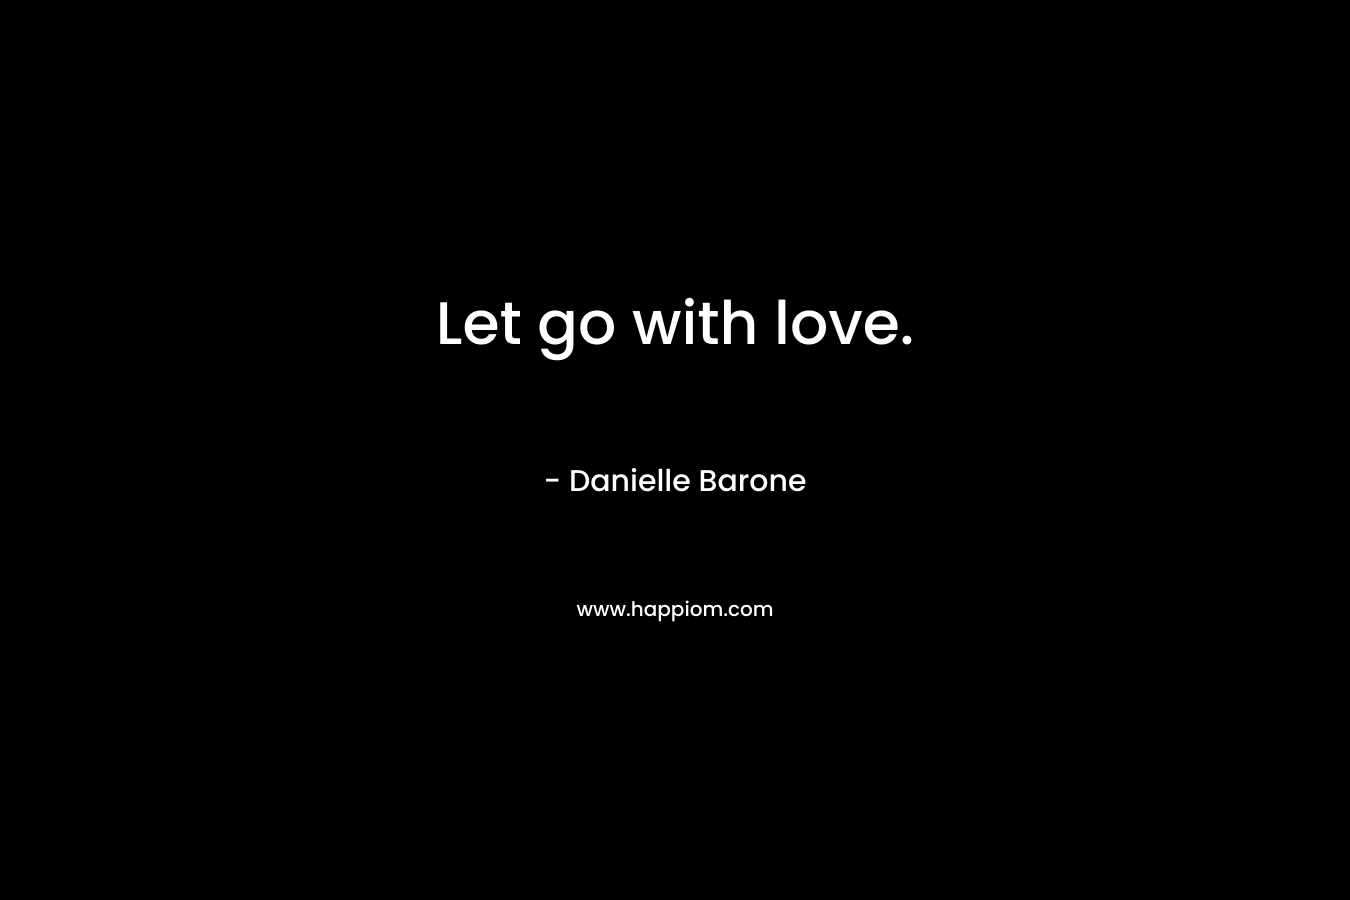 Let go with love.